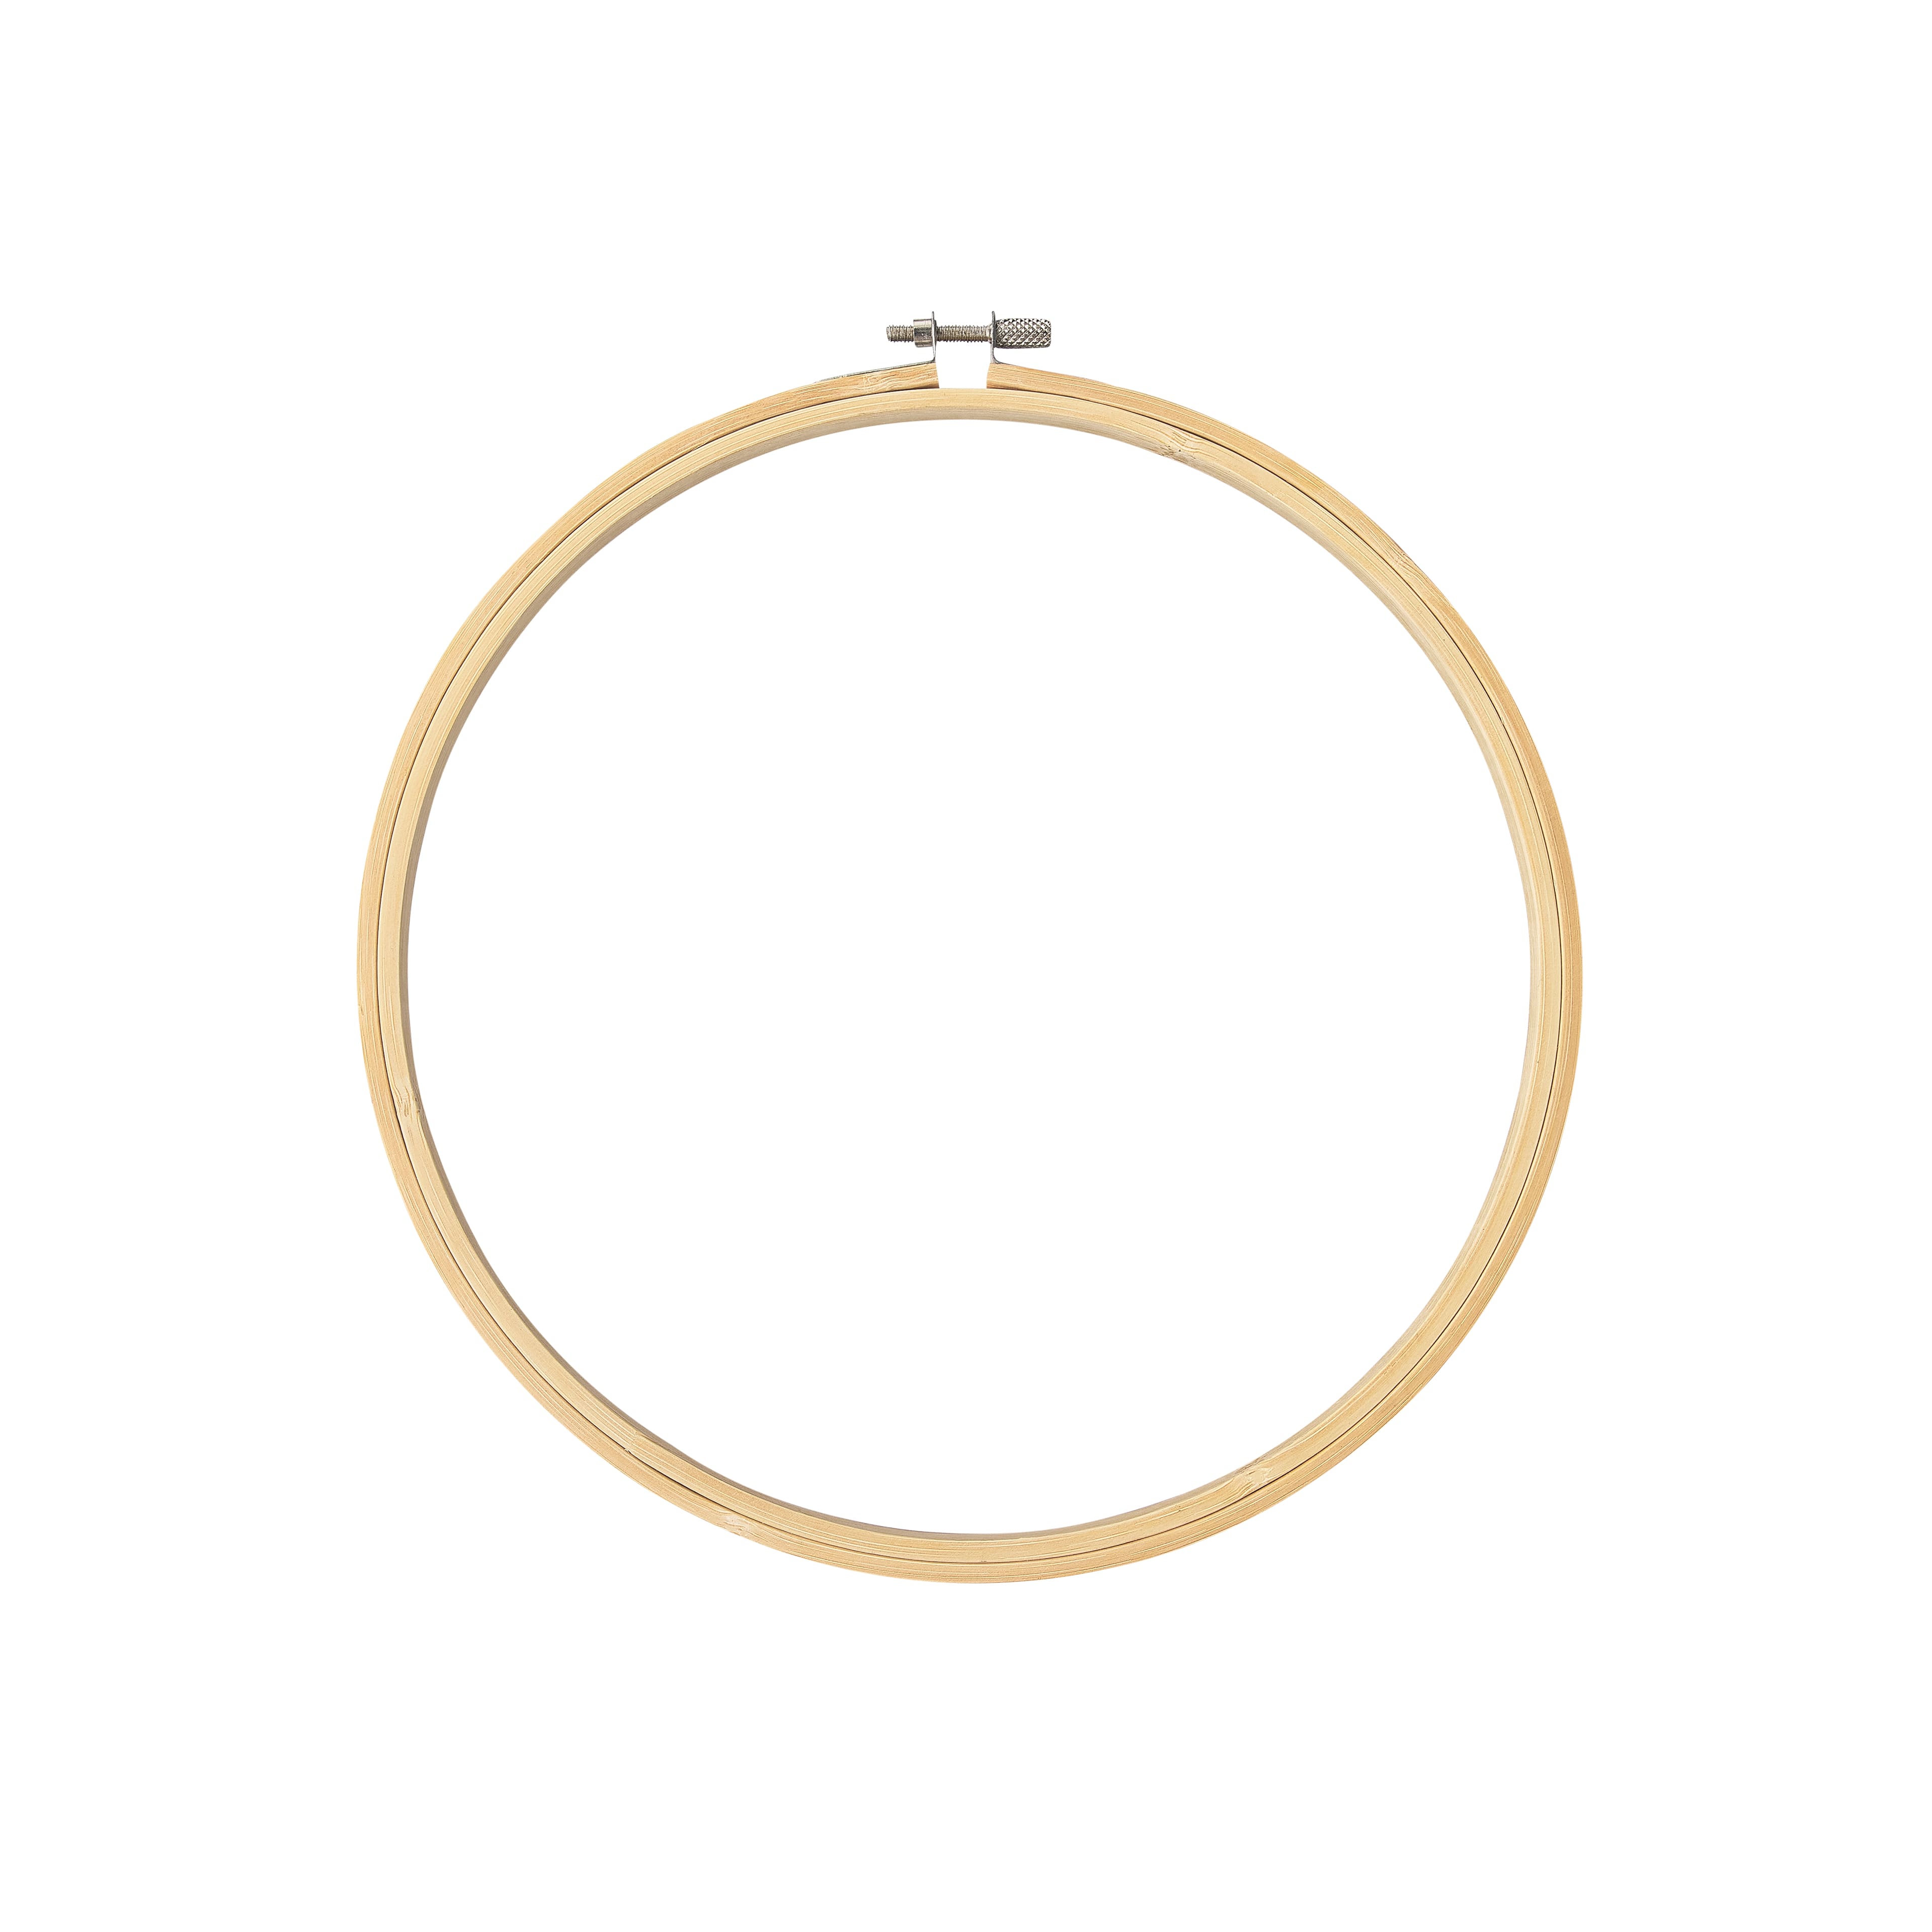 New 5 Size Bamboo Embroidery Hoop Round Loop Cross Stitch Hoop